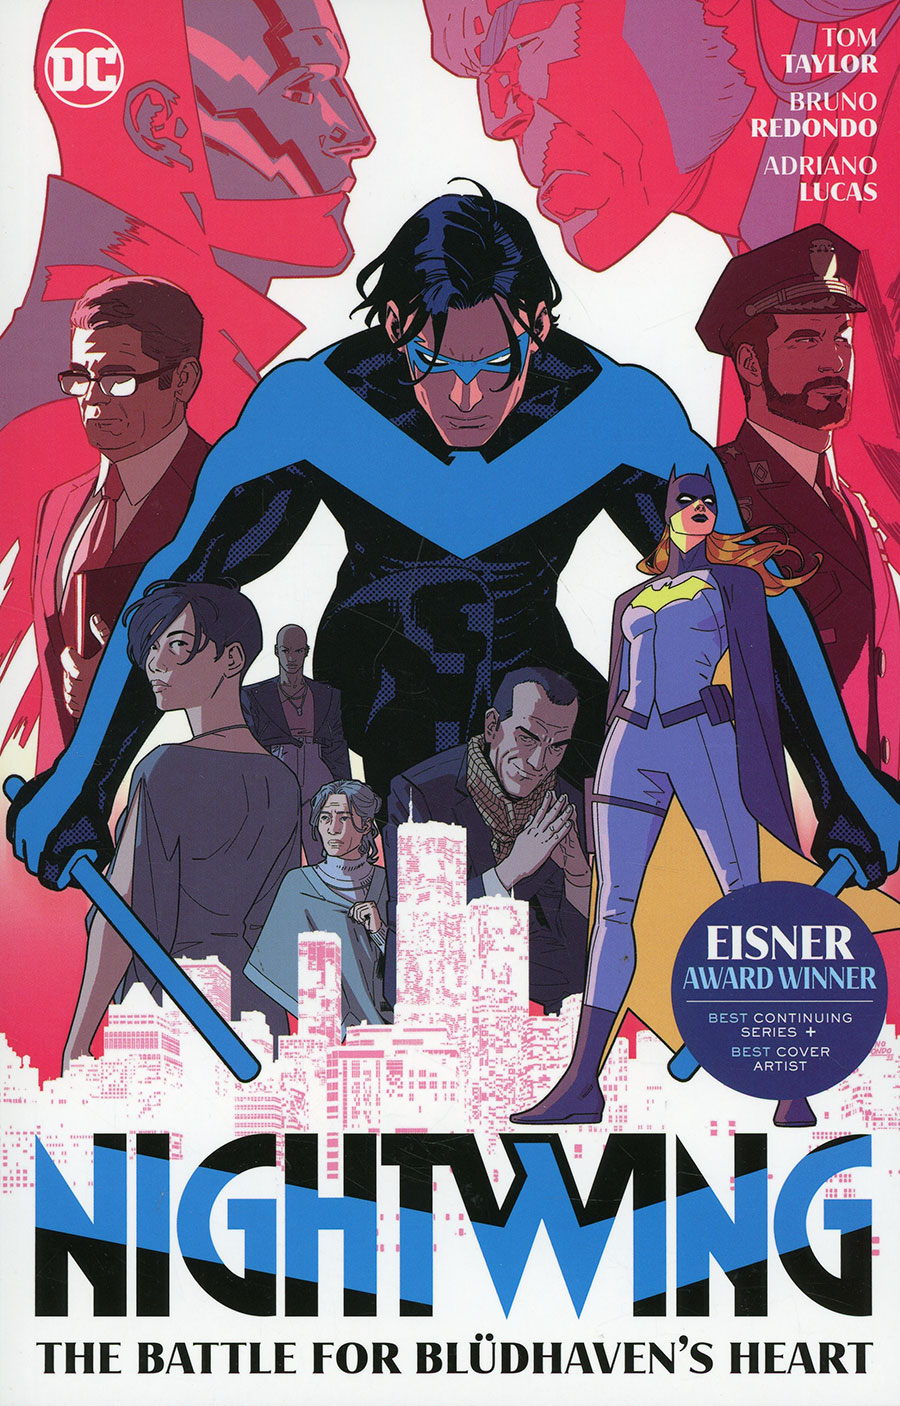 Nightwing (2021) Vol 3 The Battle For Bludhavens Heart TP